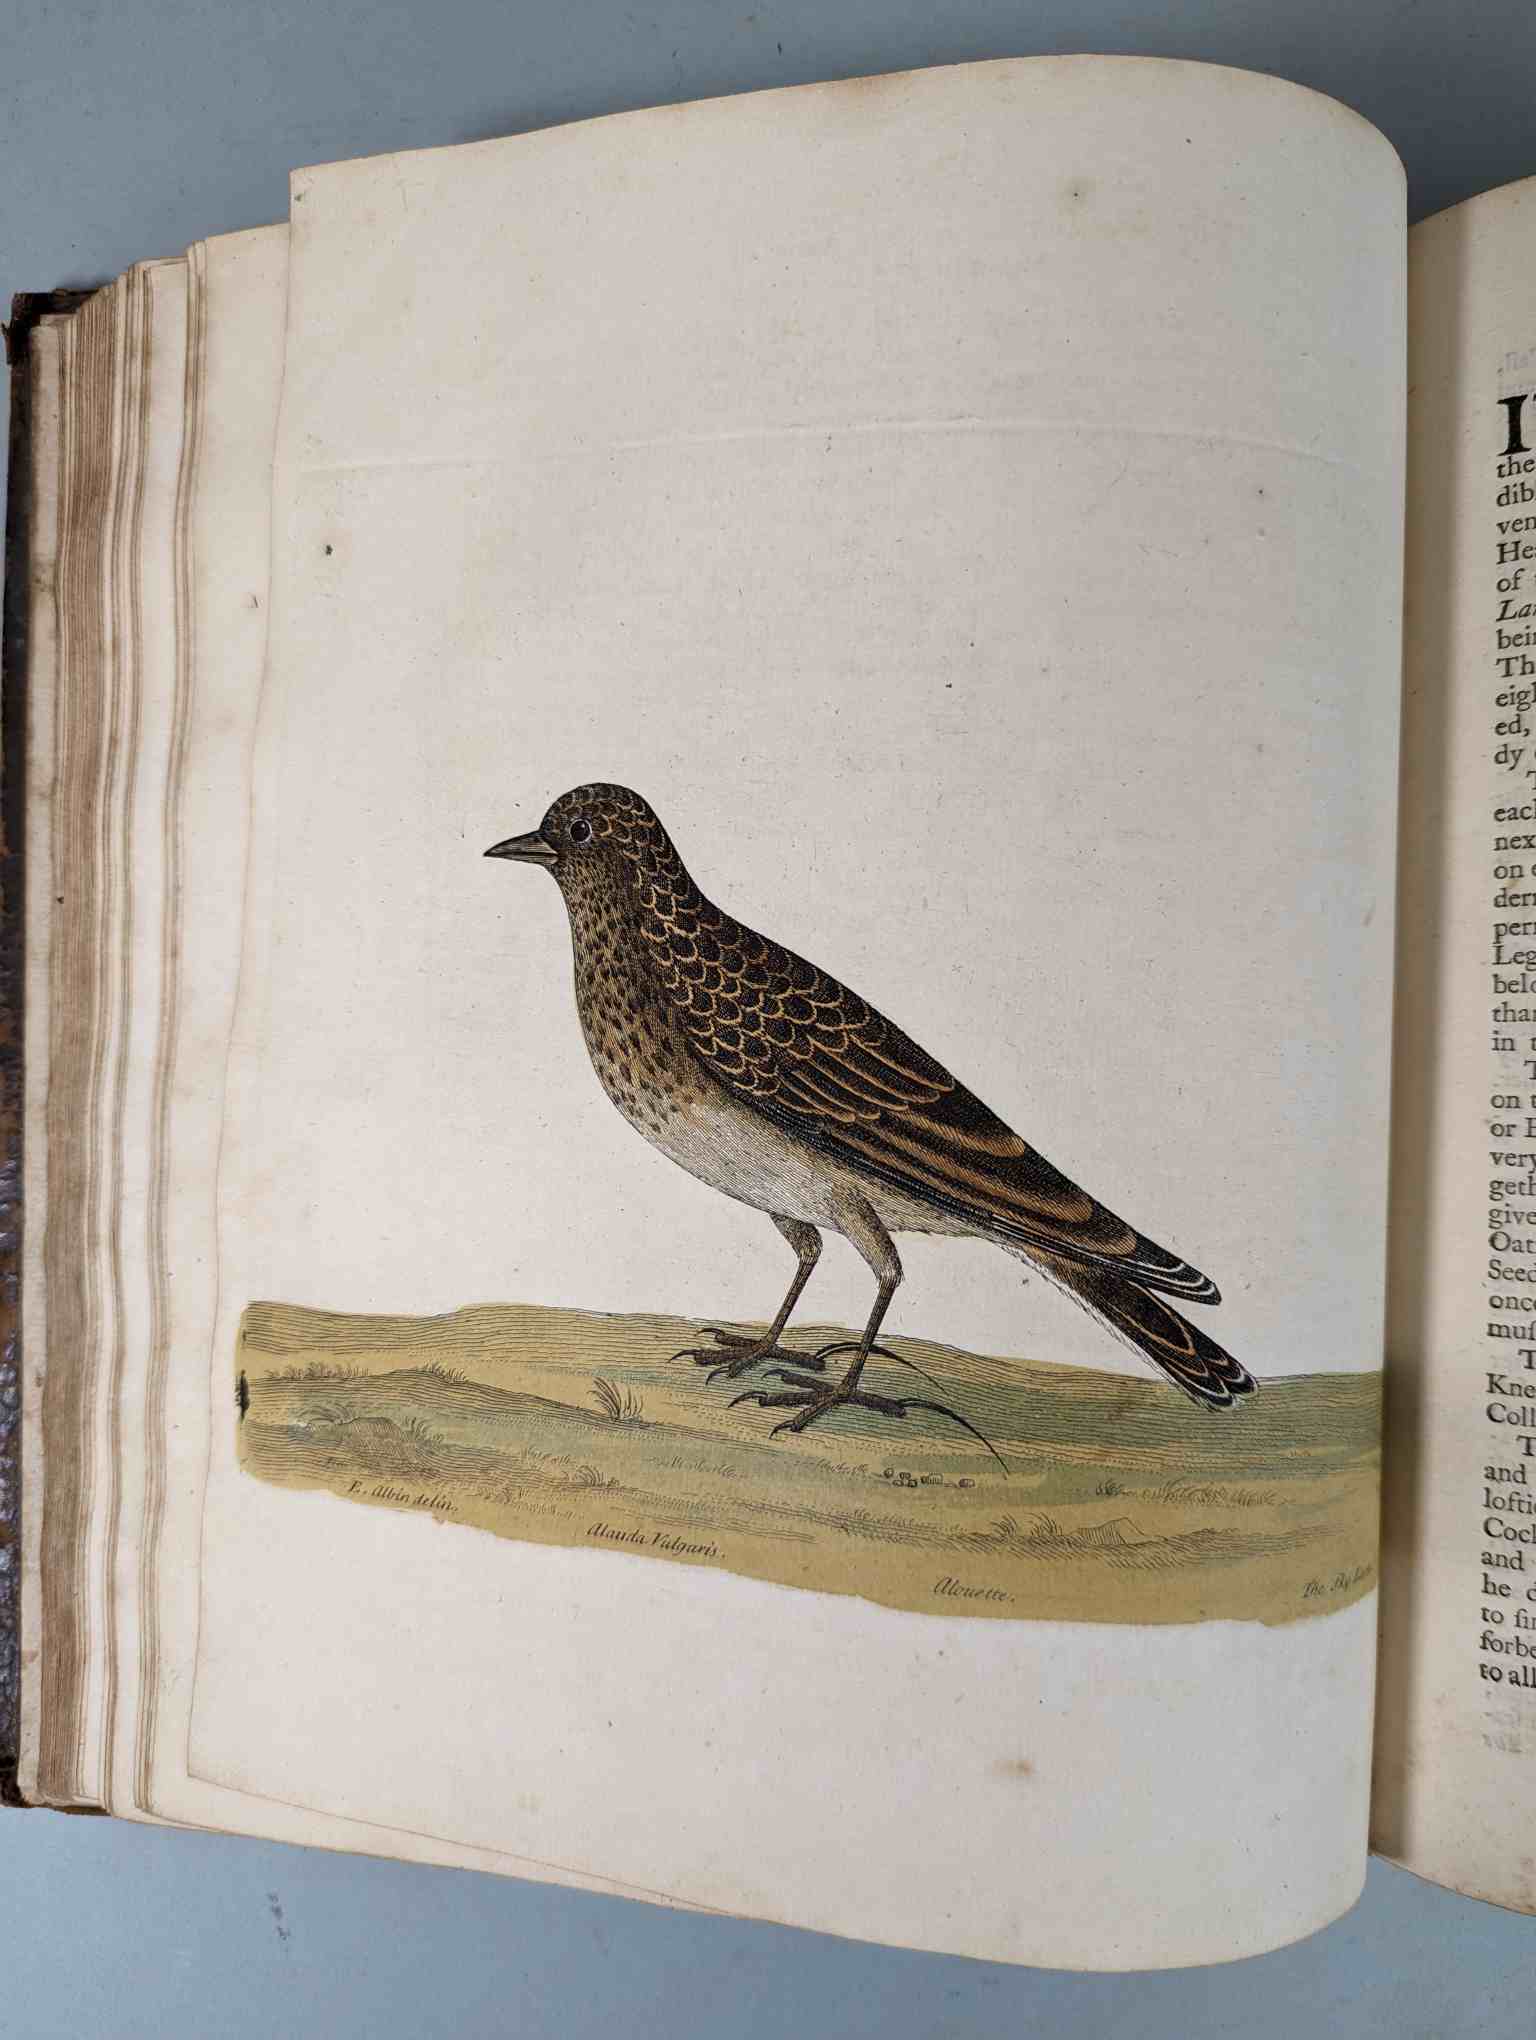 ALBIN, Eleazar. A Natural History of Birds, to which are added, Notes and Observations by W. - Image 44 of 208